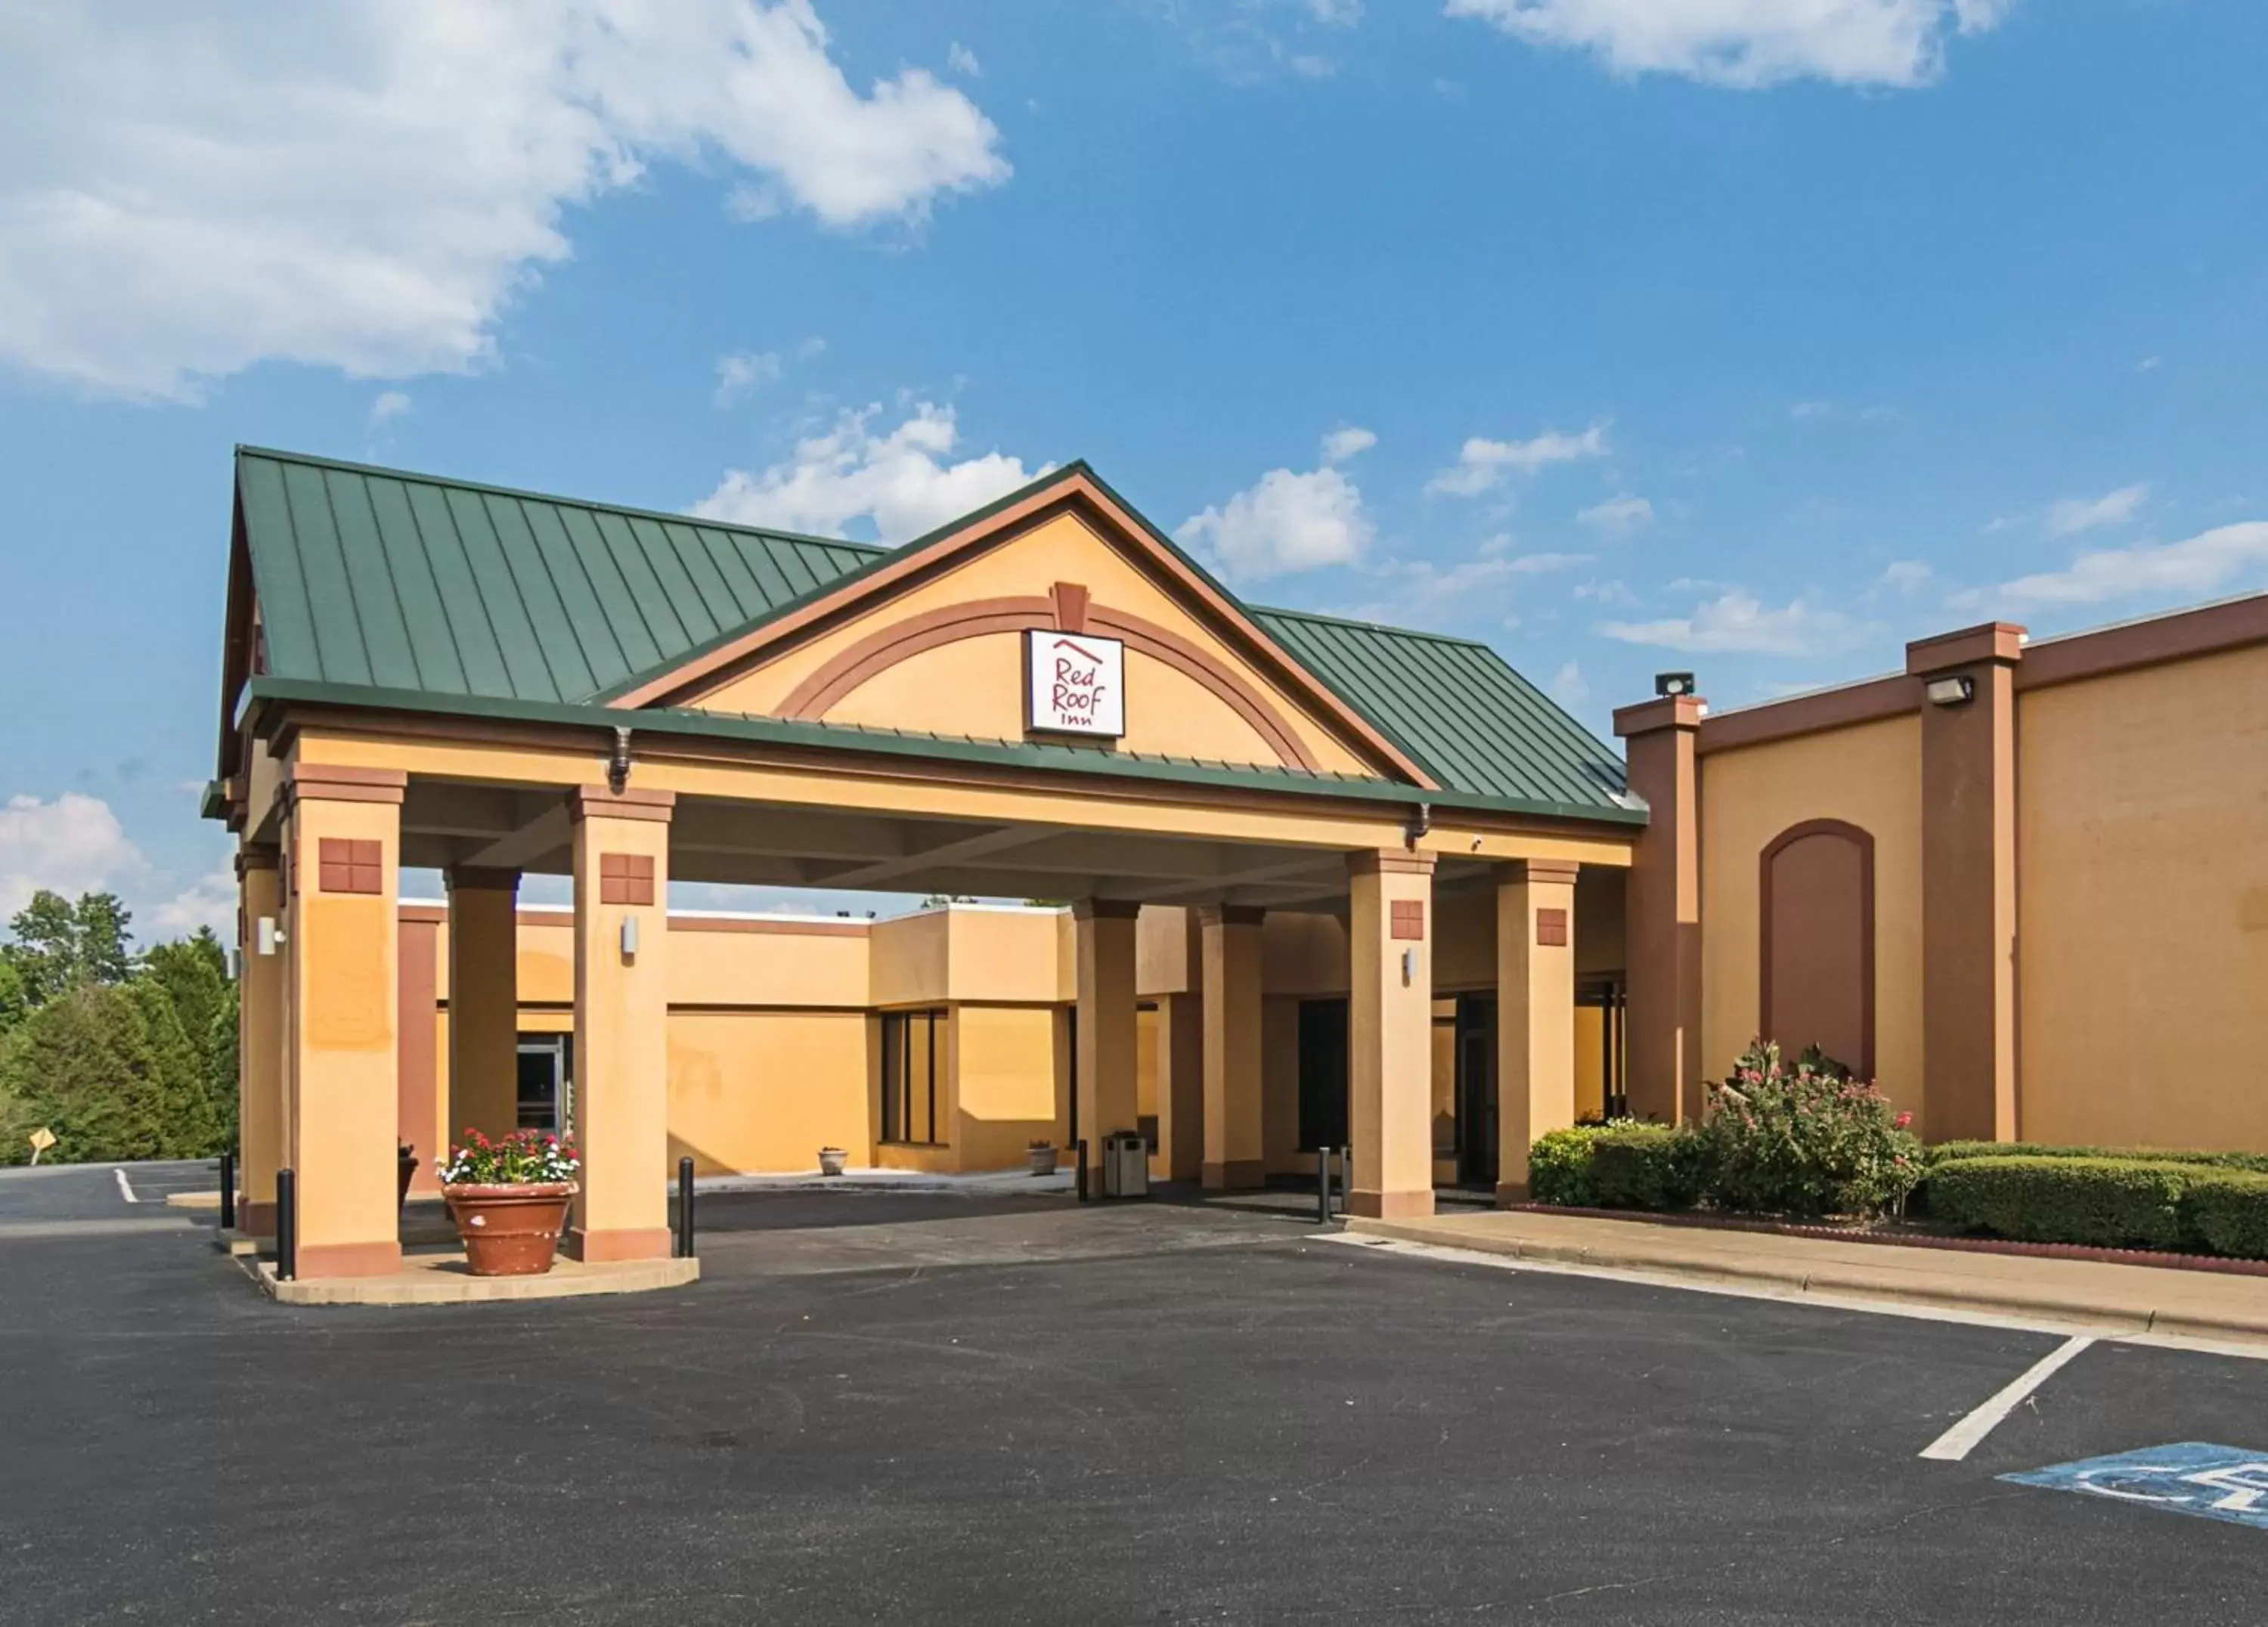 Property Building in Red Roof Inn Forsyth